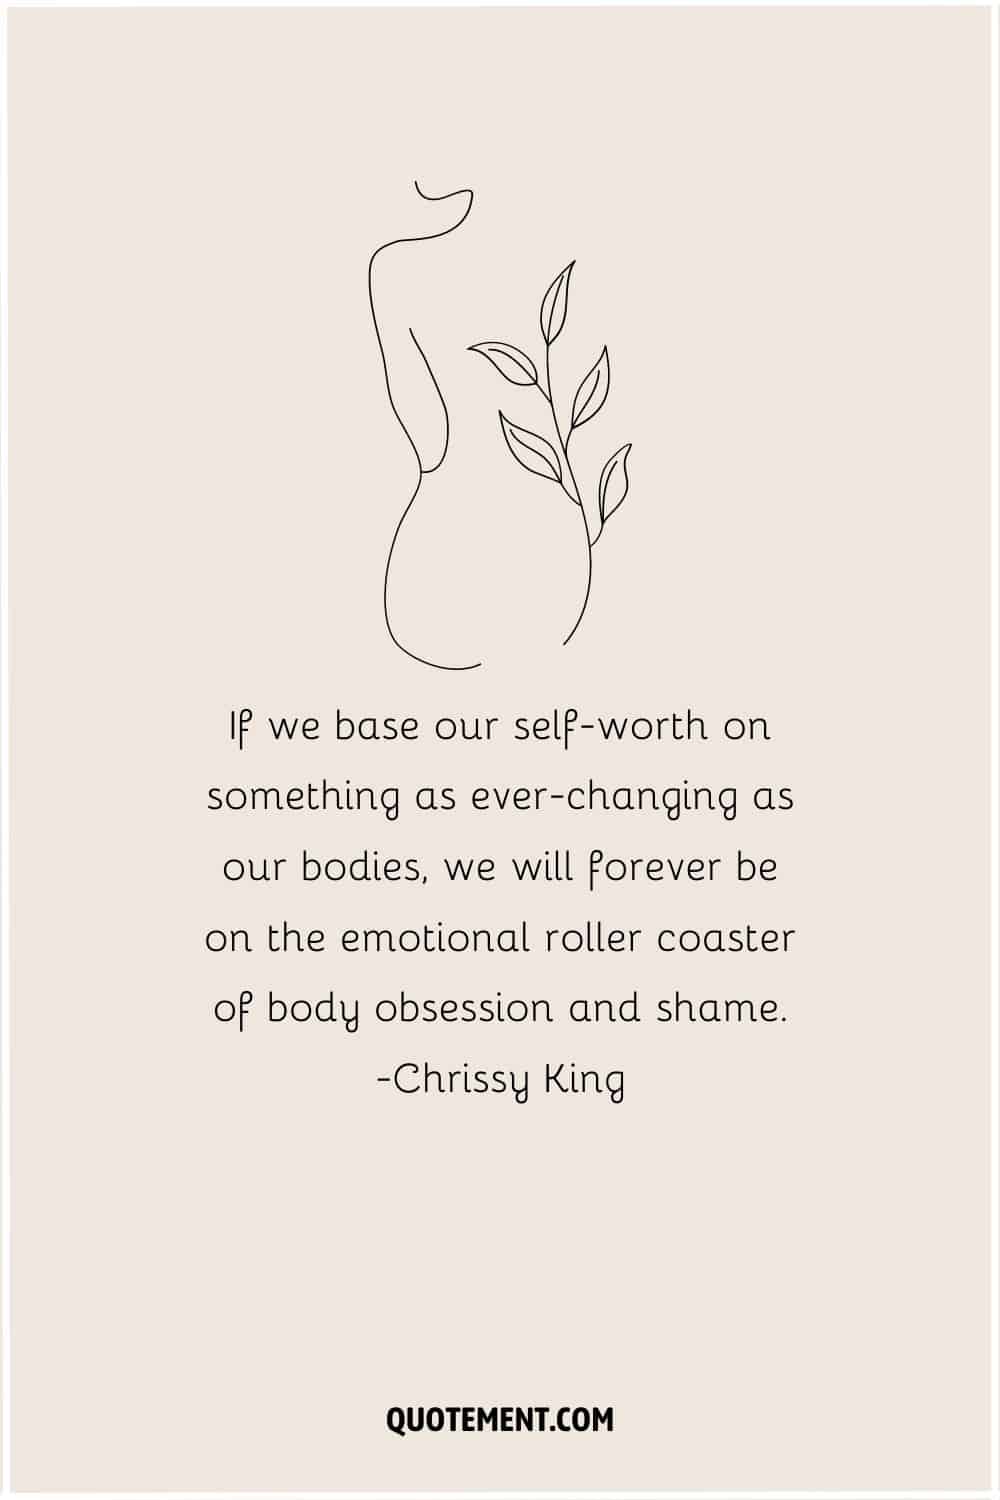 If we base our self-worth on something as ever-changing as our bodies, we will forever be on the emotional roller coaster of body obsession and shame